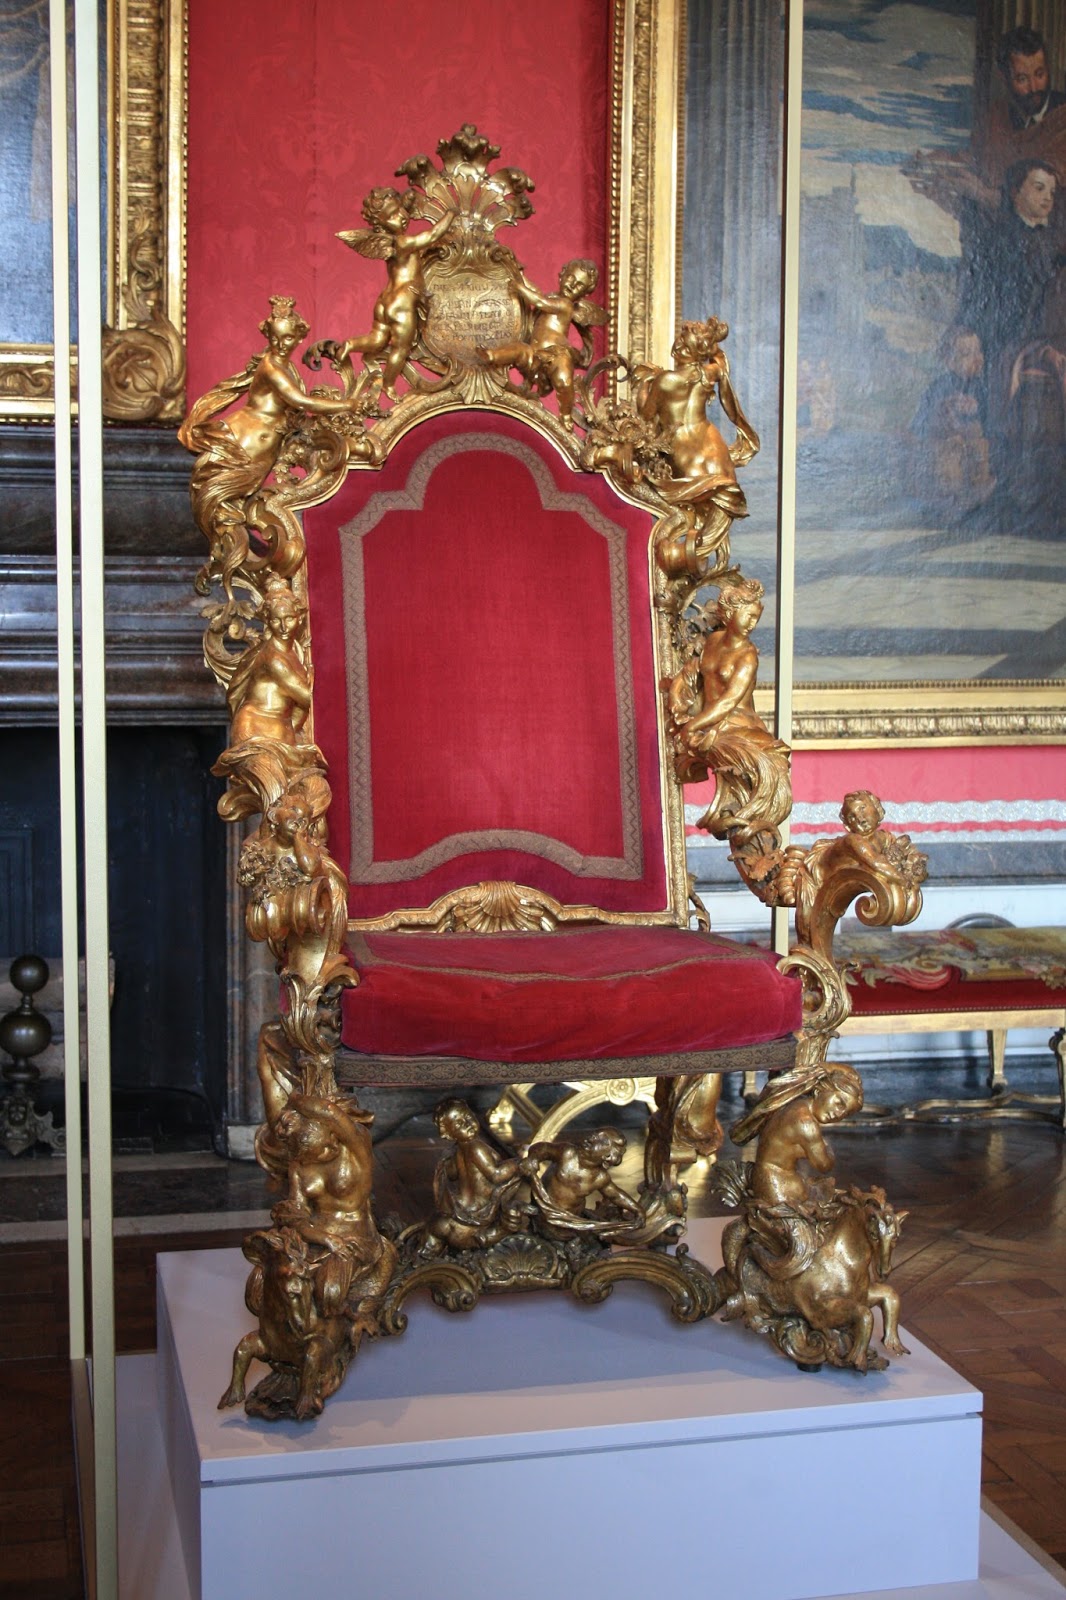 A Short History of Chairs Part II - Kings and Queens usher ...